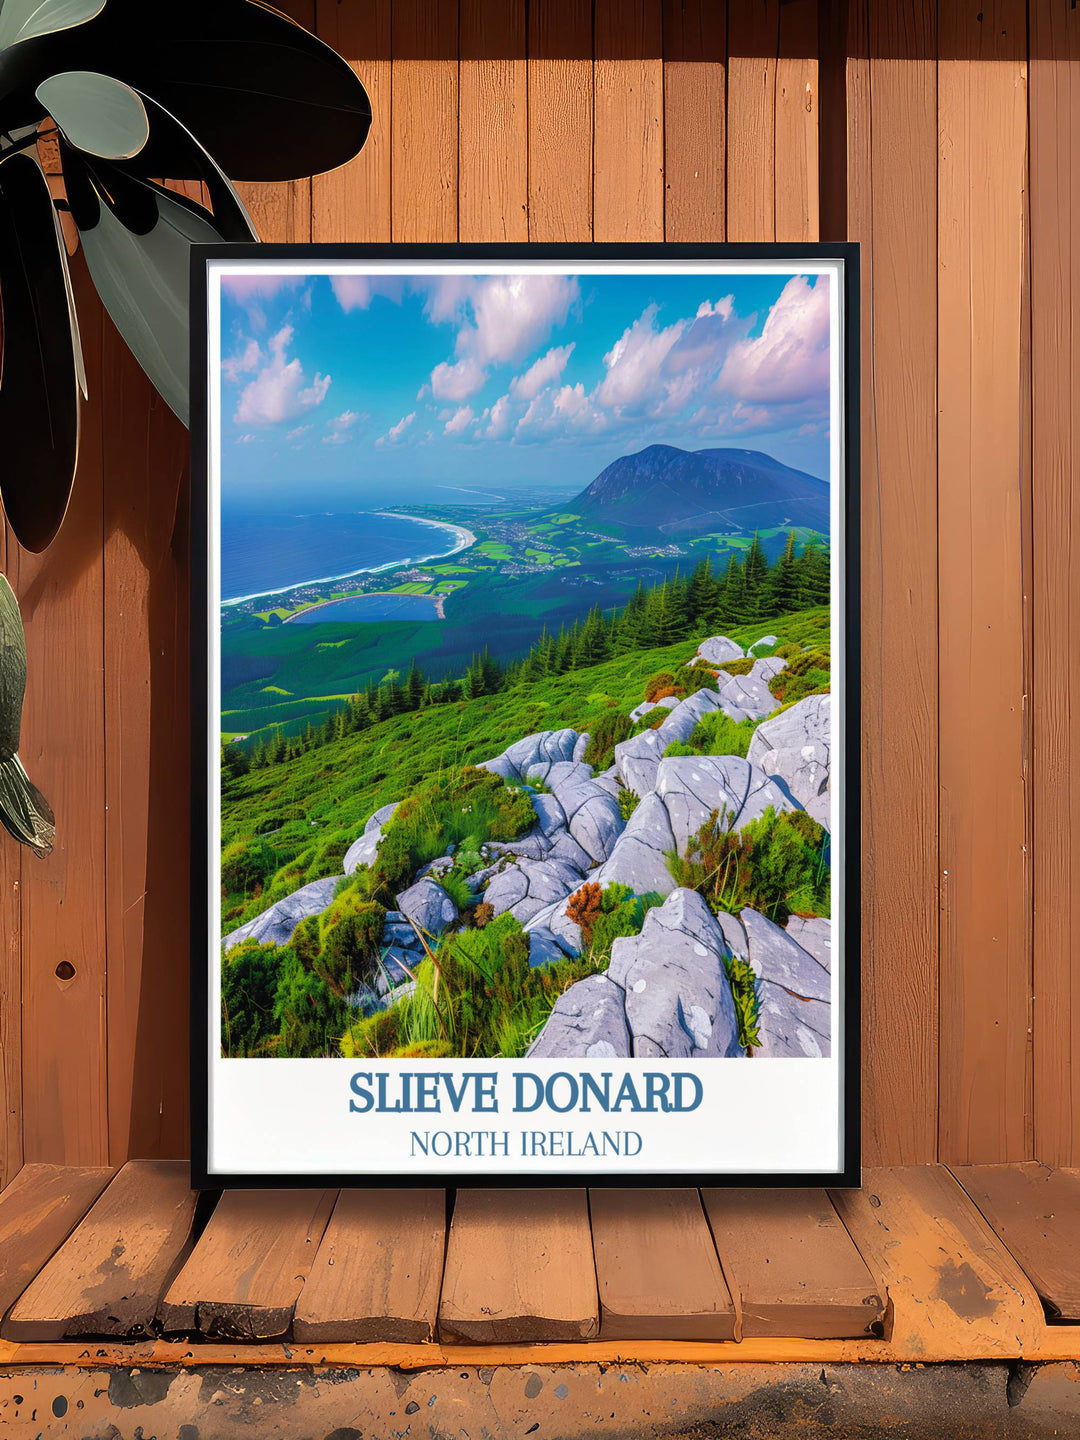 Custom prints of the Mourne Mountains allow you to choose your favorite scenes from Northern Irelands iconic landscapes. Whether its the rugged stonework of the Mourne Wall or the sweeping vistas of Slieve Donard, these prints can be tailored to fit your style.